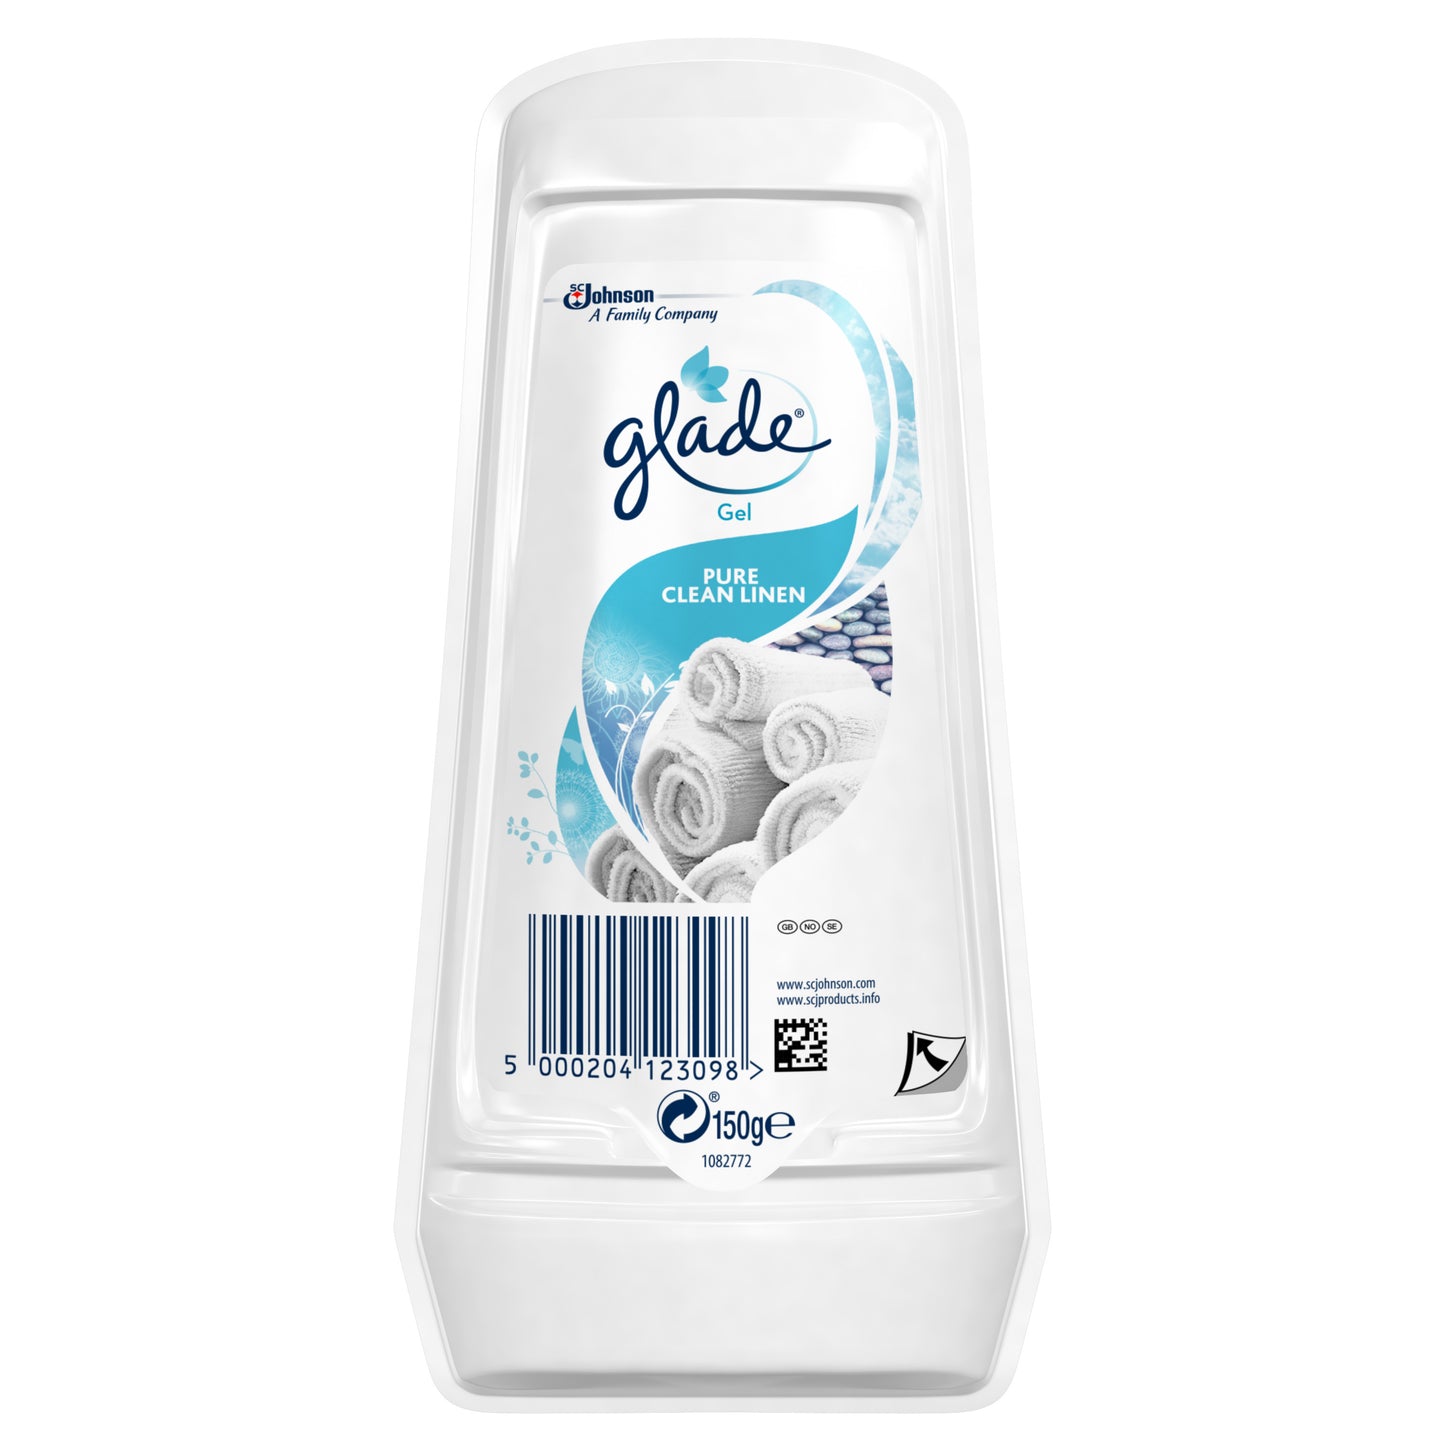 Glade Clean Linen Gel Air Freshener - Home Office Any Room Fragrance